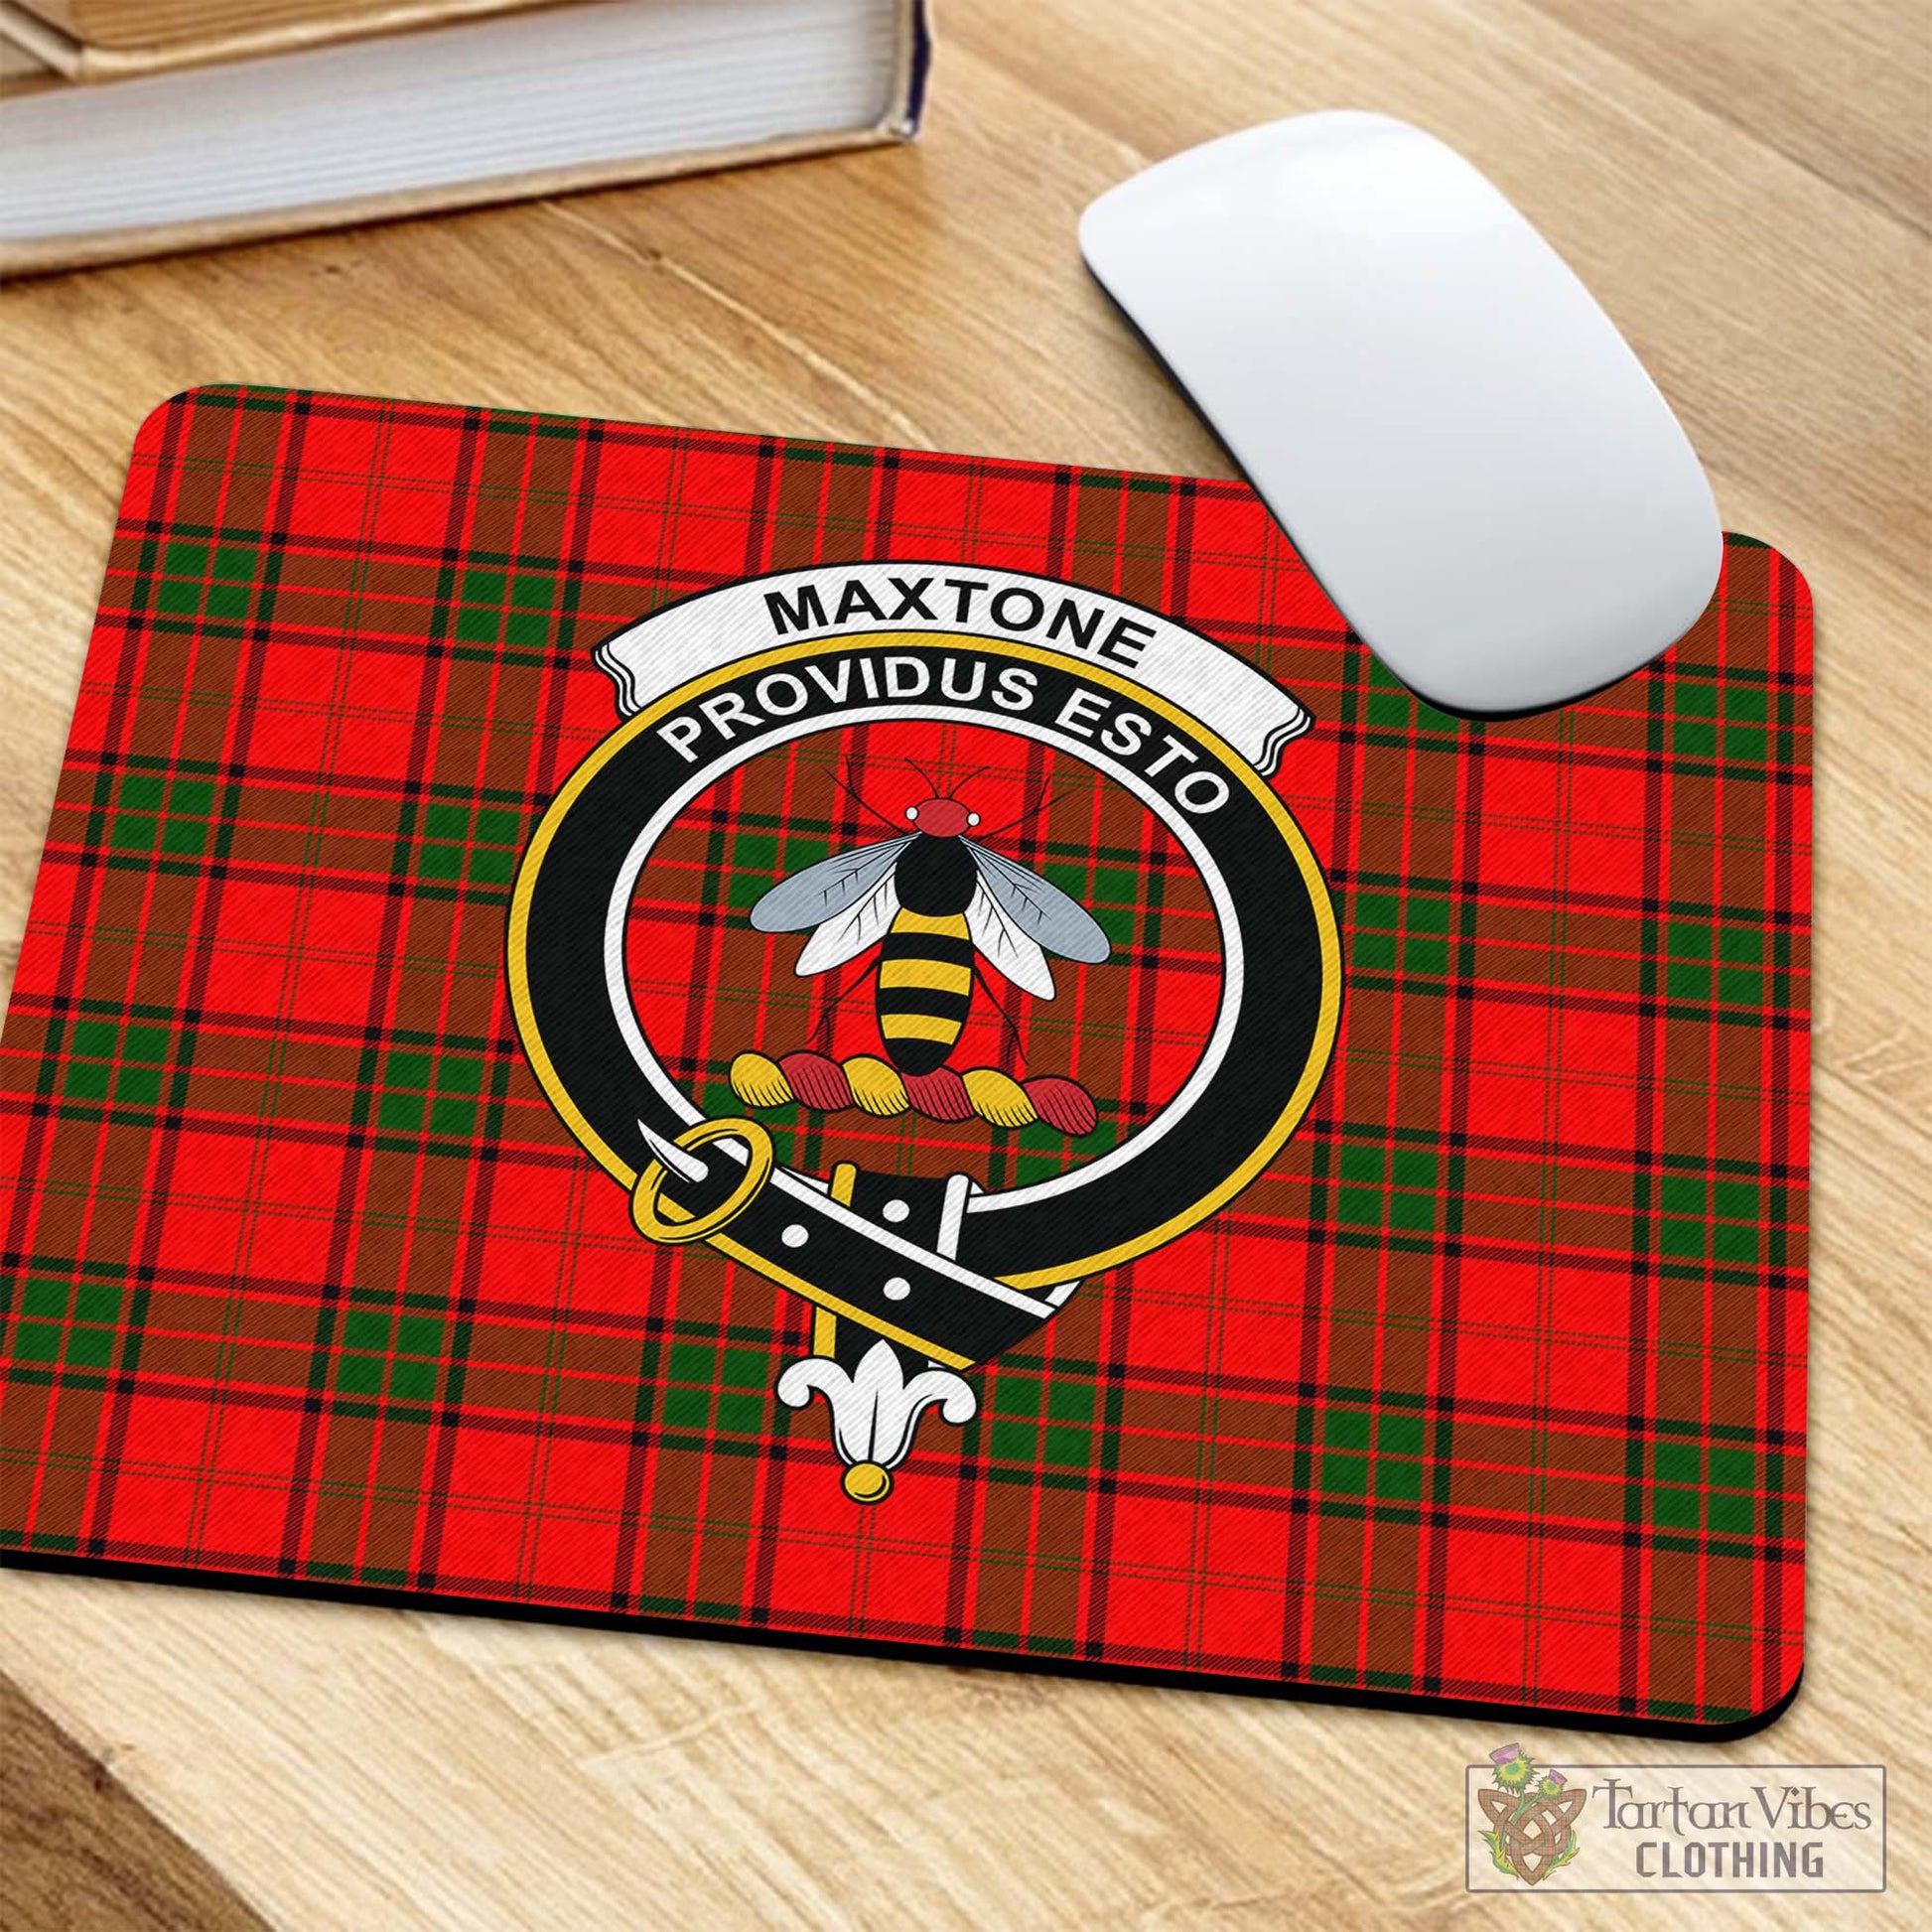 Tartan Vibes Clothing Maxtone Tartan Mouse Pad with Family Crest